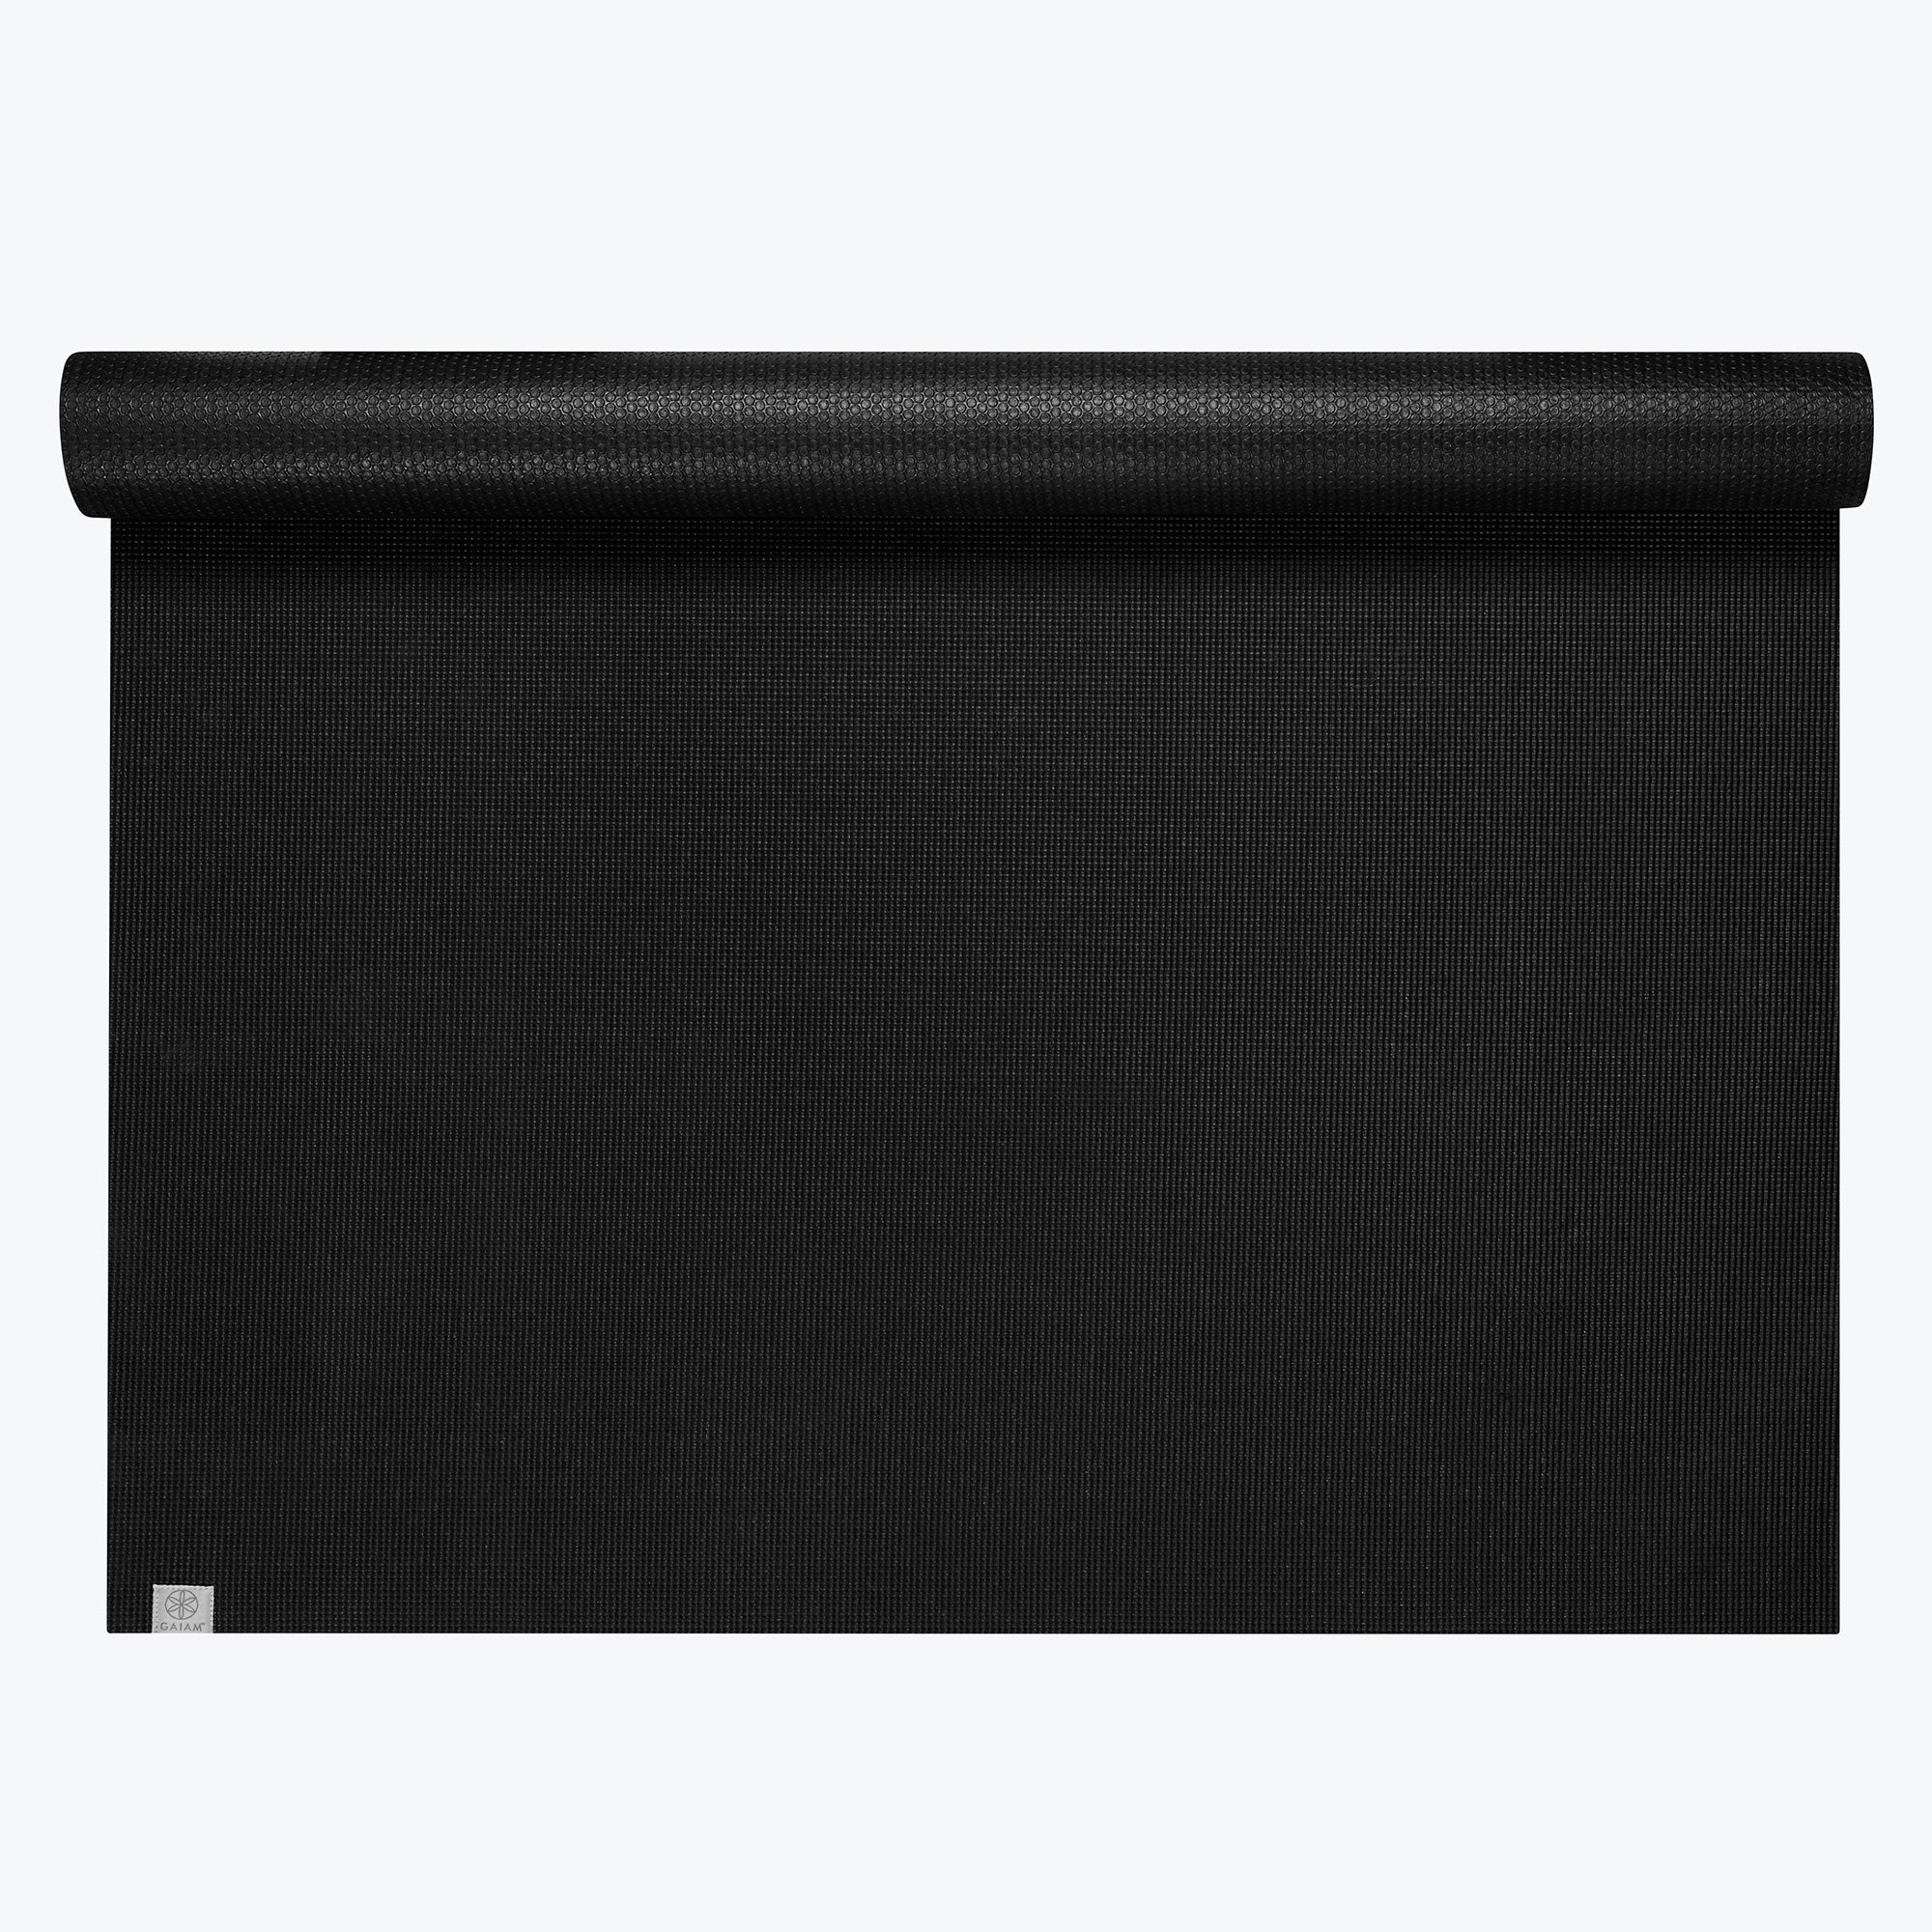 Extra Thick (3/4in) Yoga Mat - Black